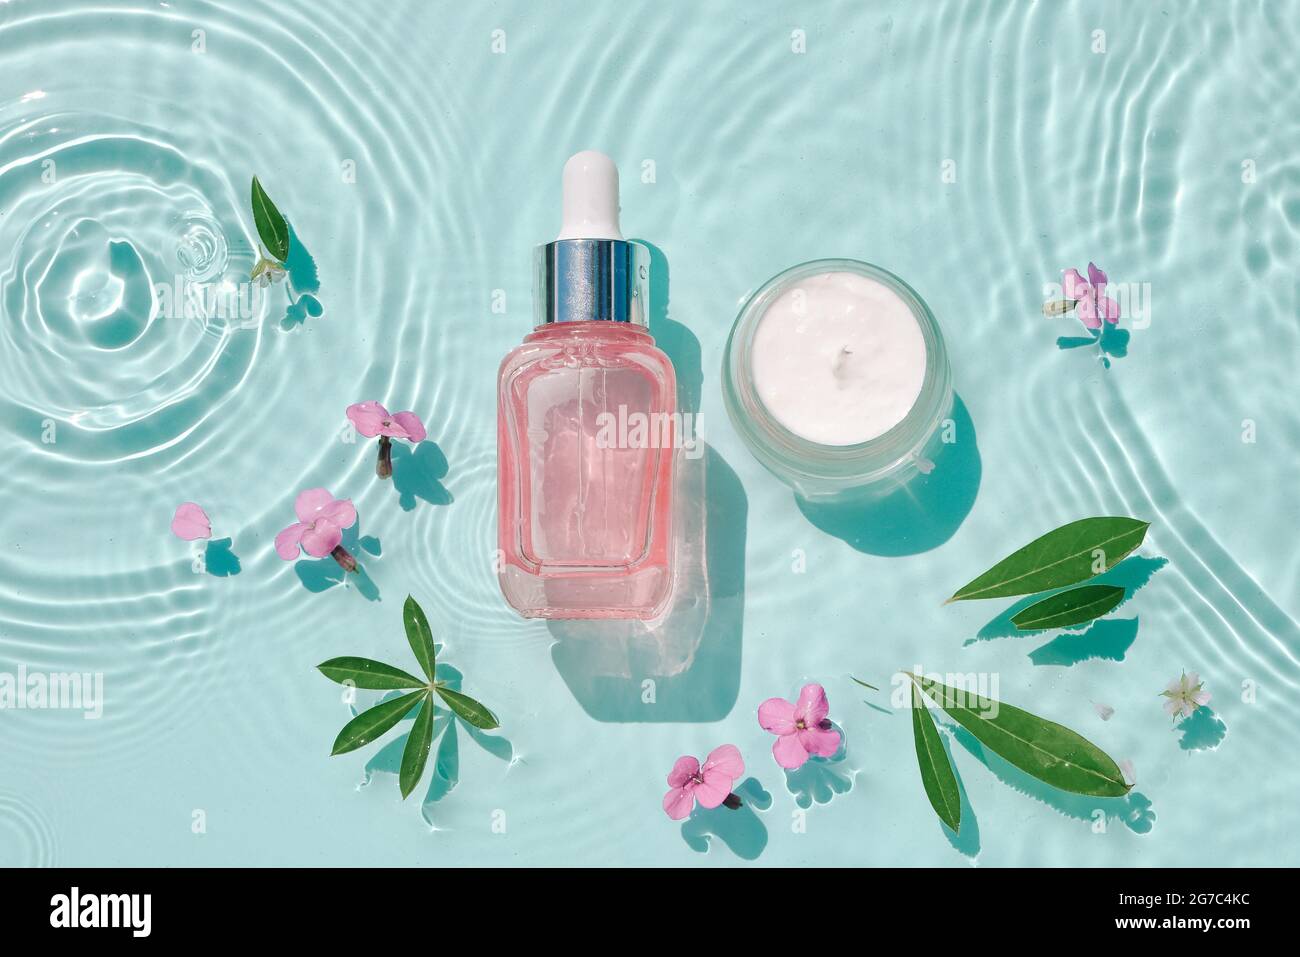 Set moisturizing cosmetic products on water with drops. Serum glass bottle and cream jar on aqua surface with waves in sunlight. Concept for advertisi Stock Photo